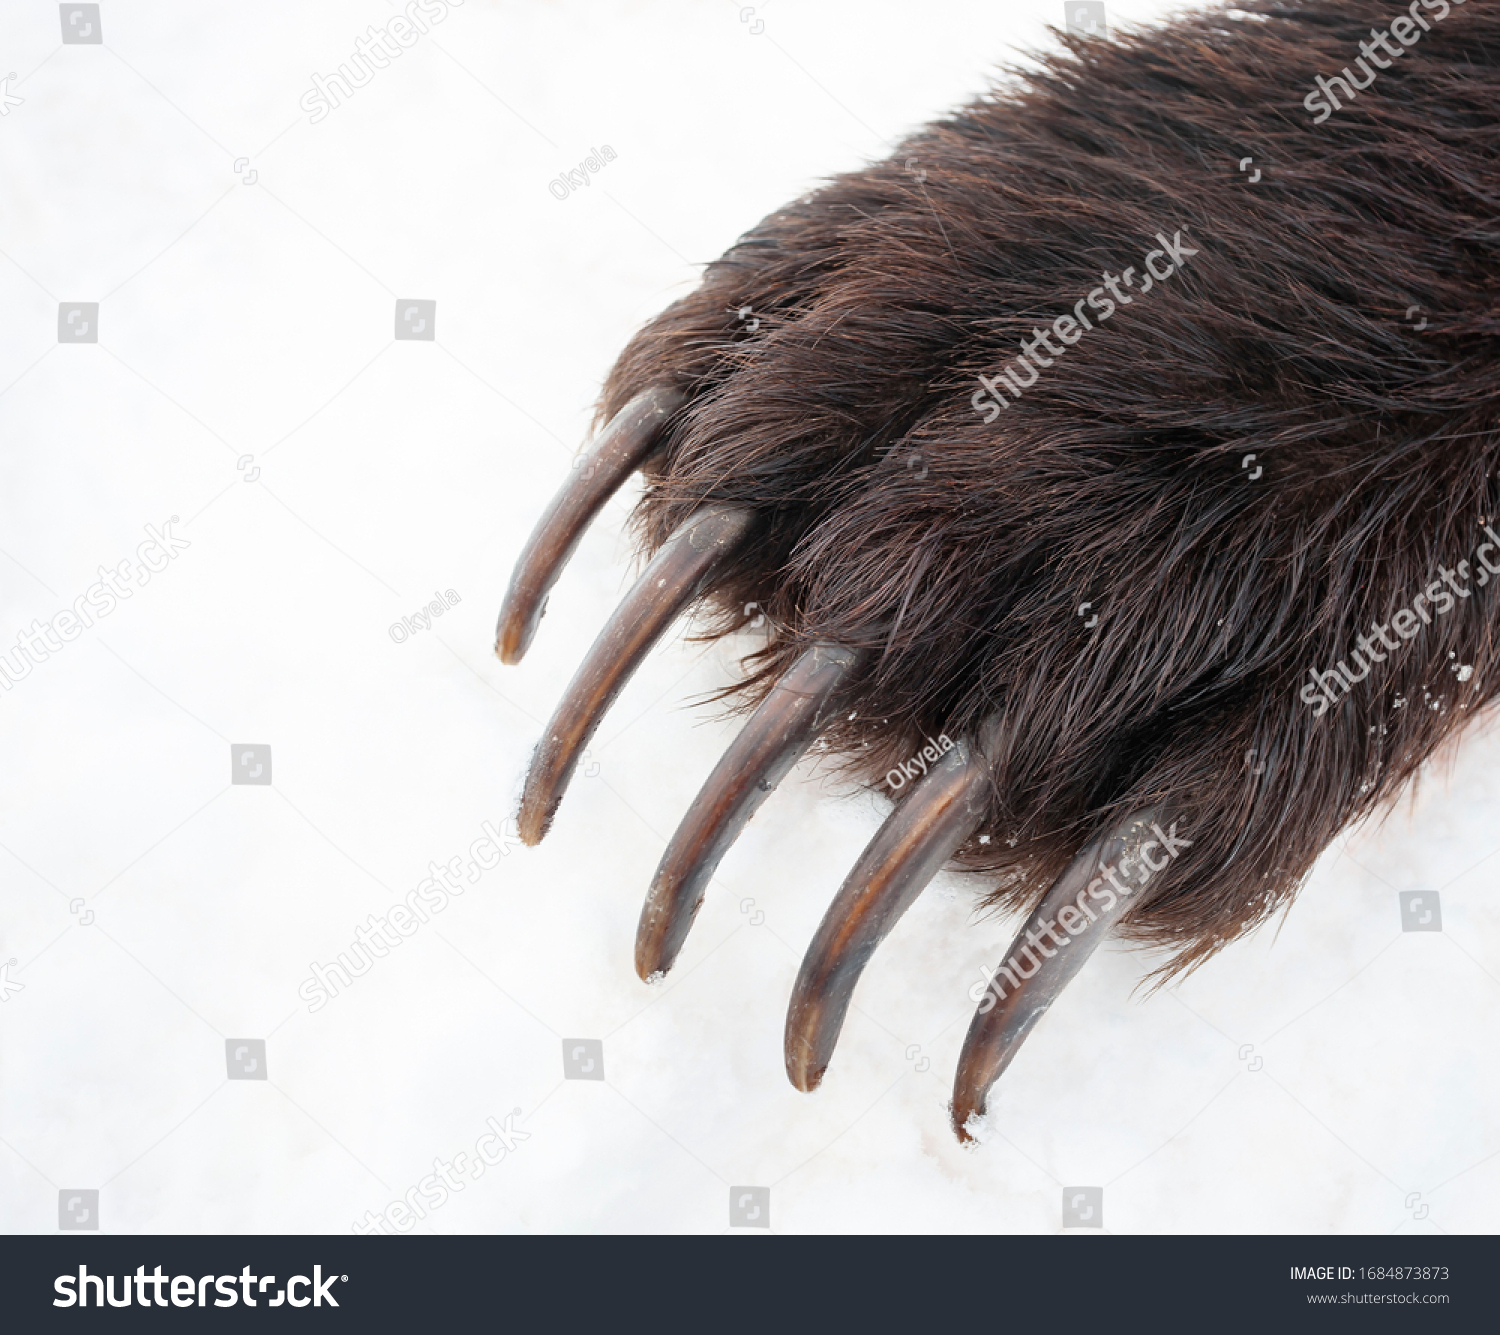 Long bear claws on the front right paw. Kamchatka bear claws on the background of spring white snow.  #1684873873